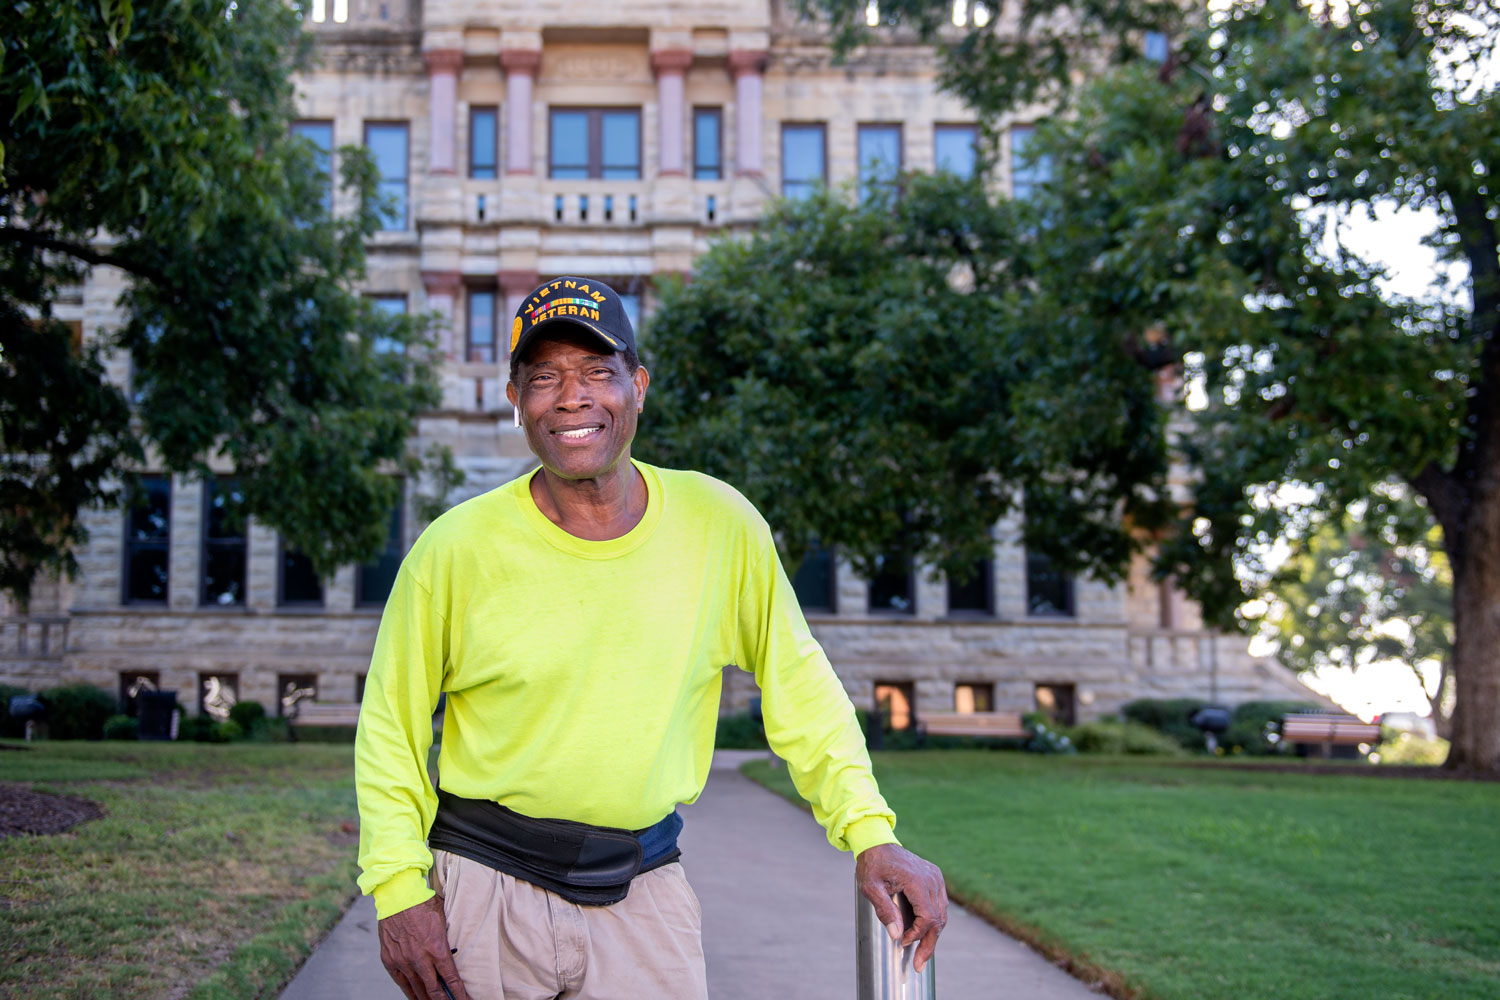 Willie Hudspeth in front of the Denton County Courthouse